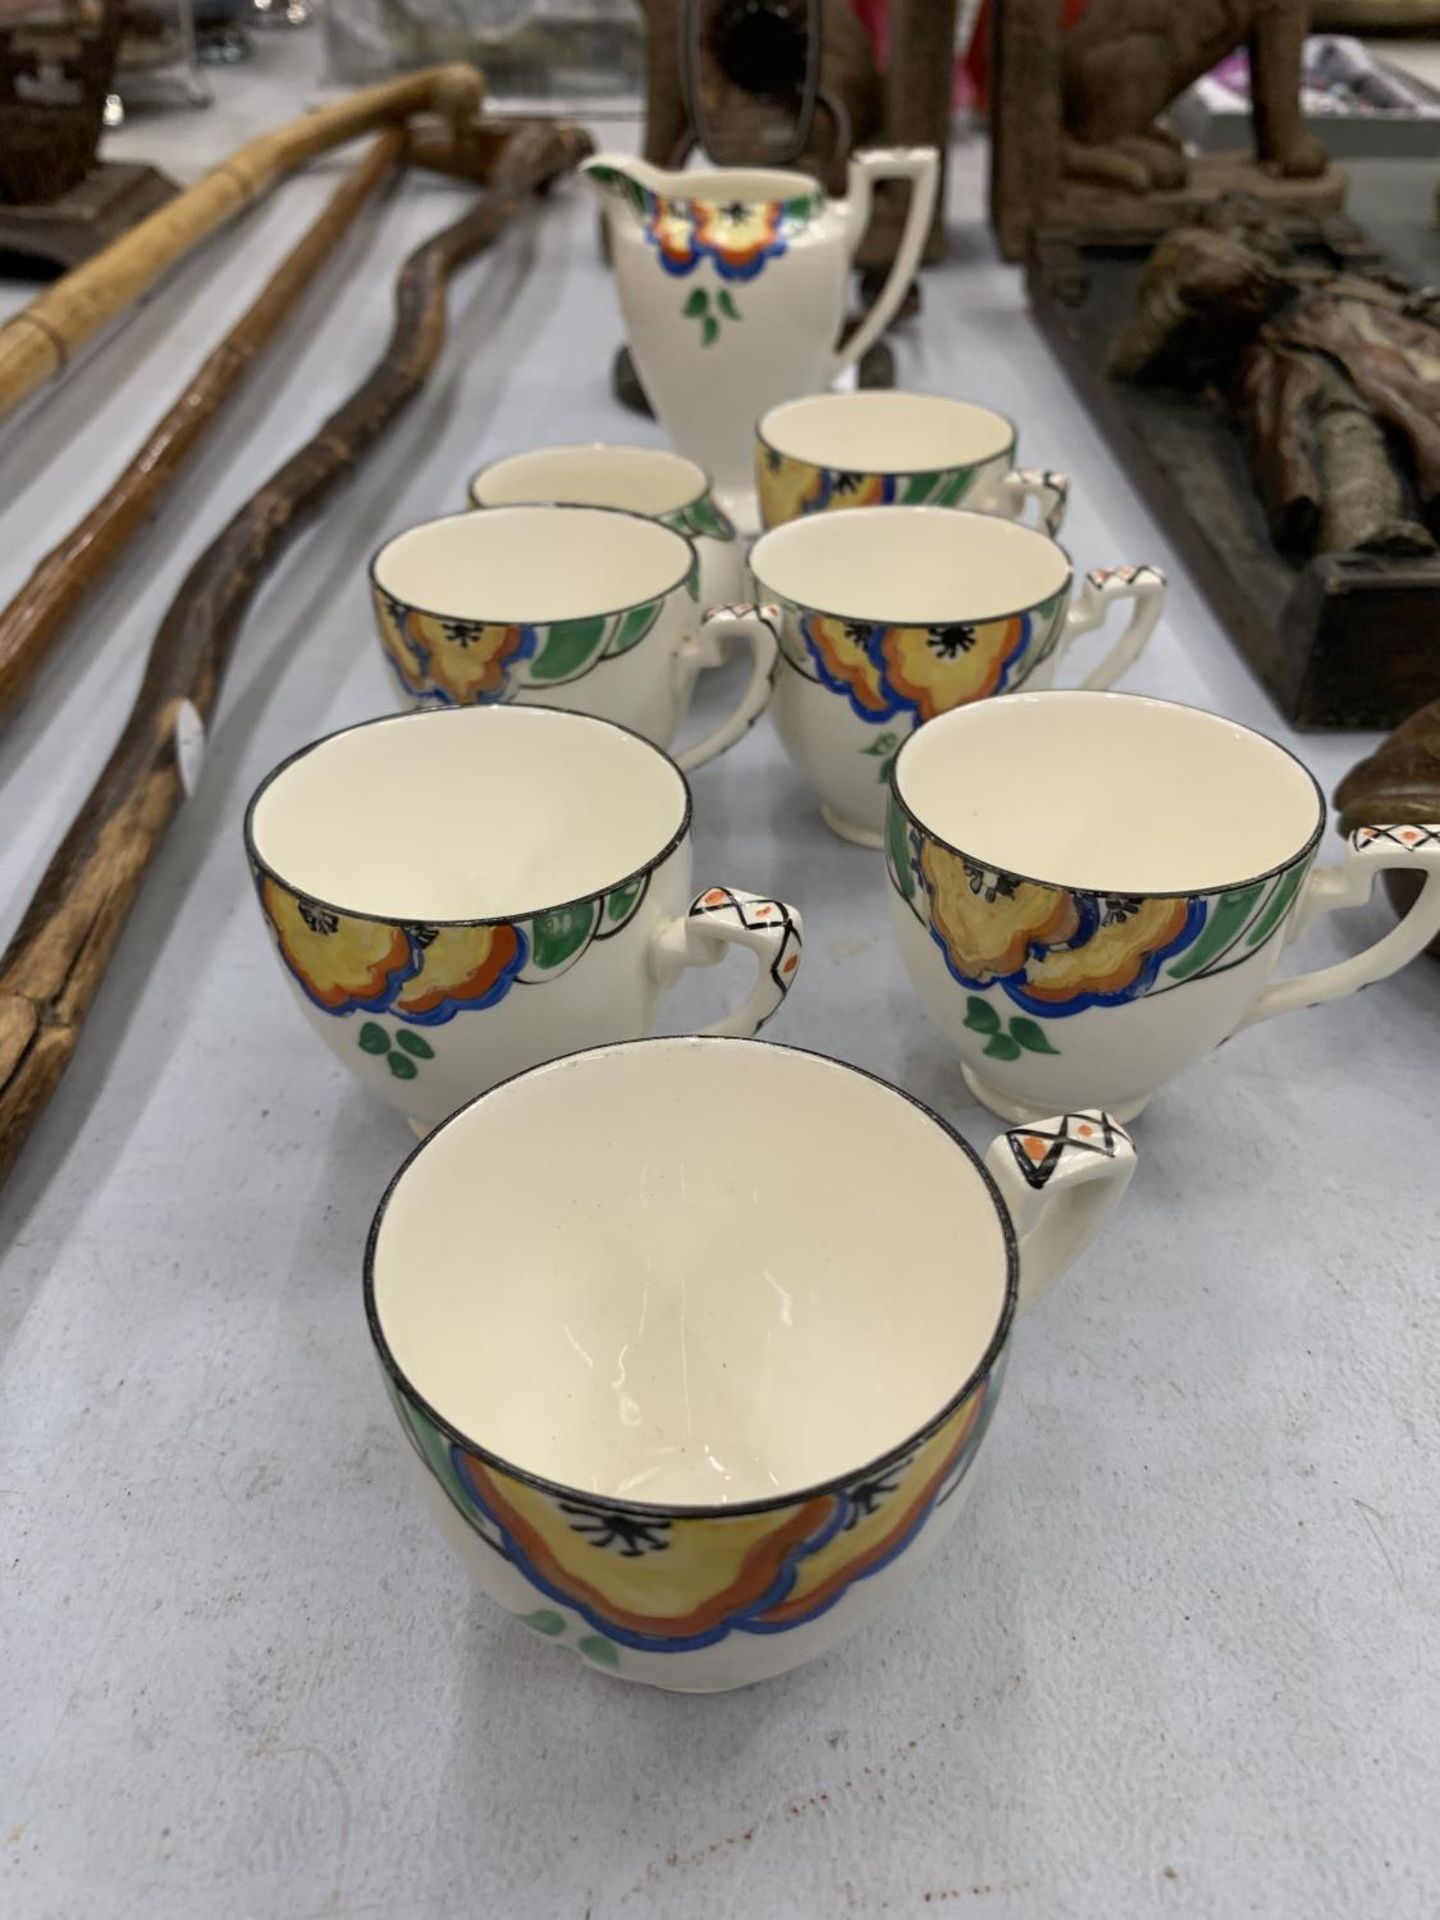 A QUANTITY OF VINTAGE CROWN DUCAL WARE TEAWARE TO INCLUDE 6 CUPS - 1 A/F, A CREAM JUG AND SUGAR